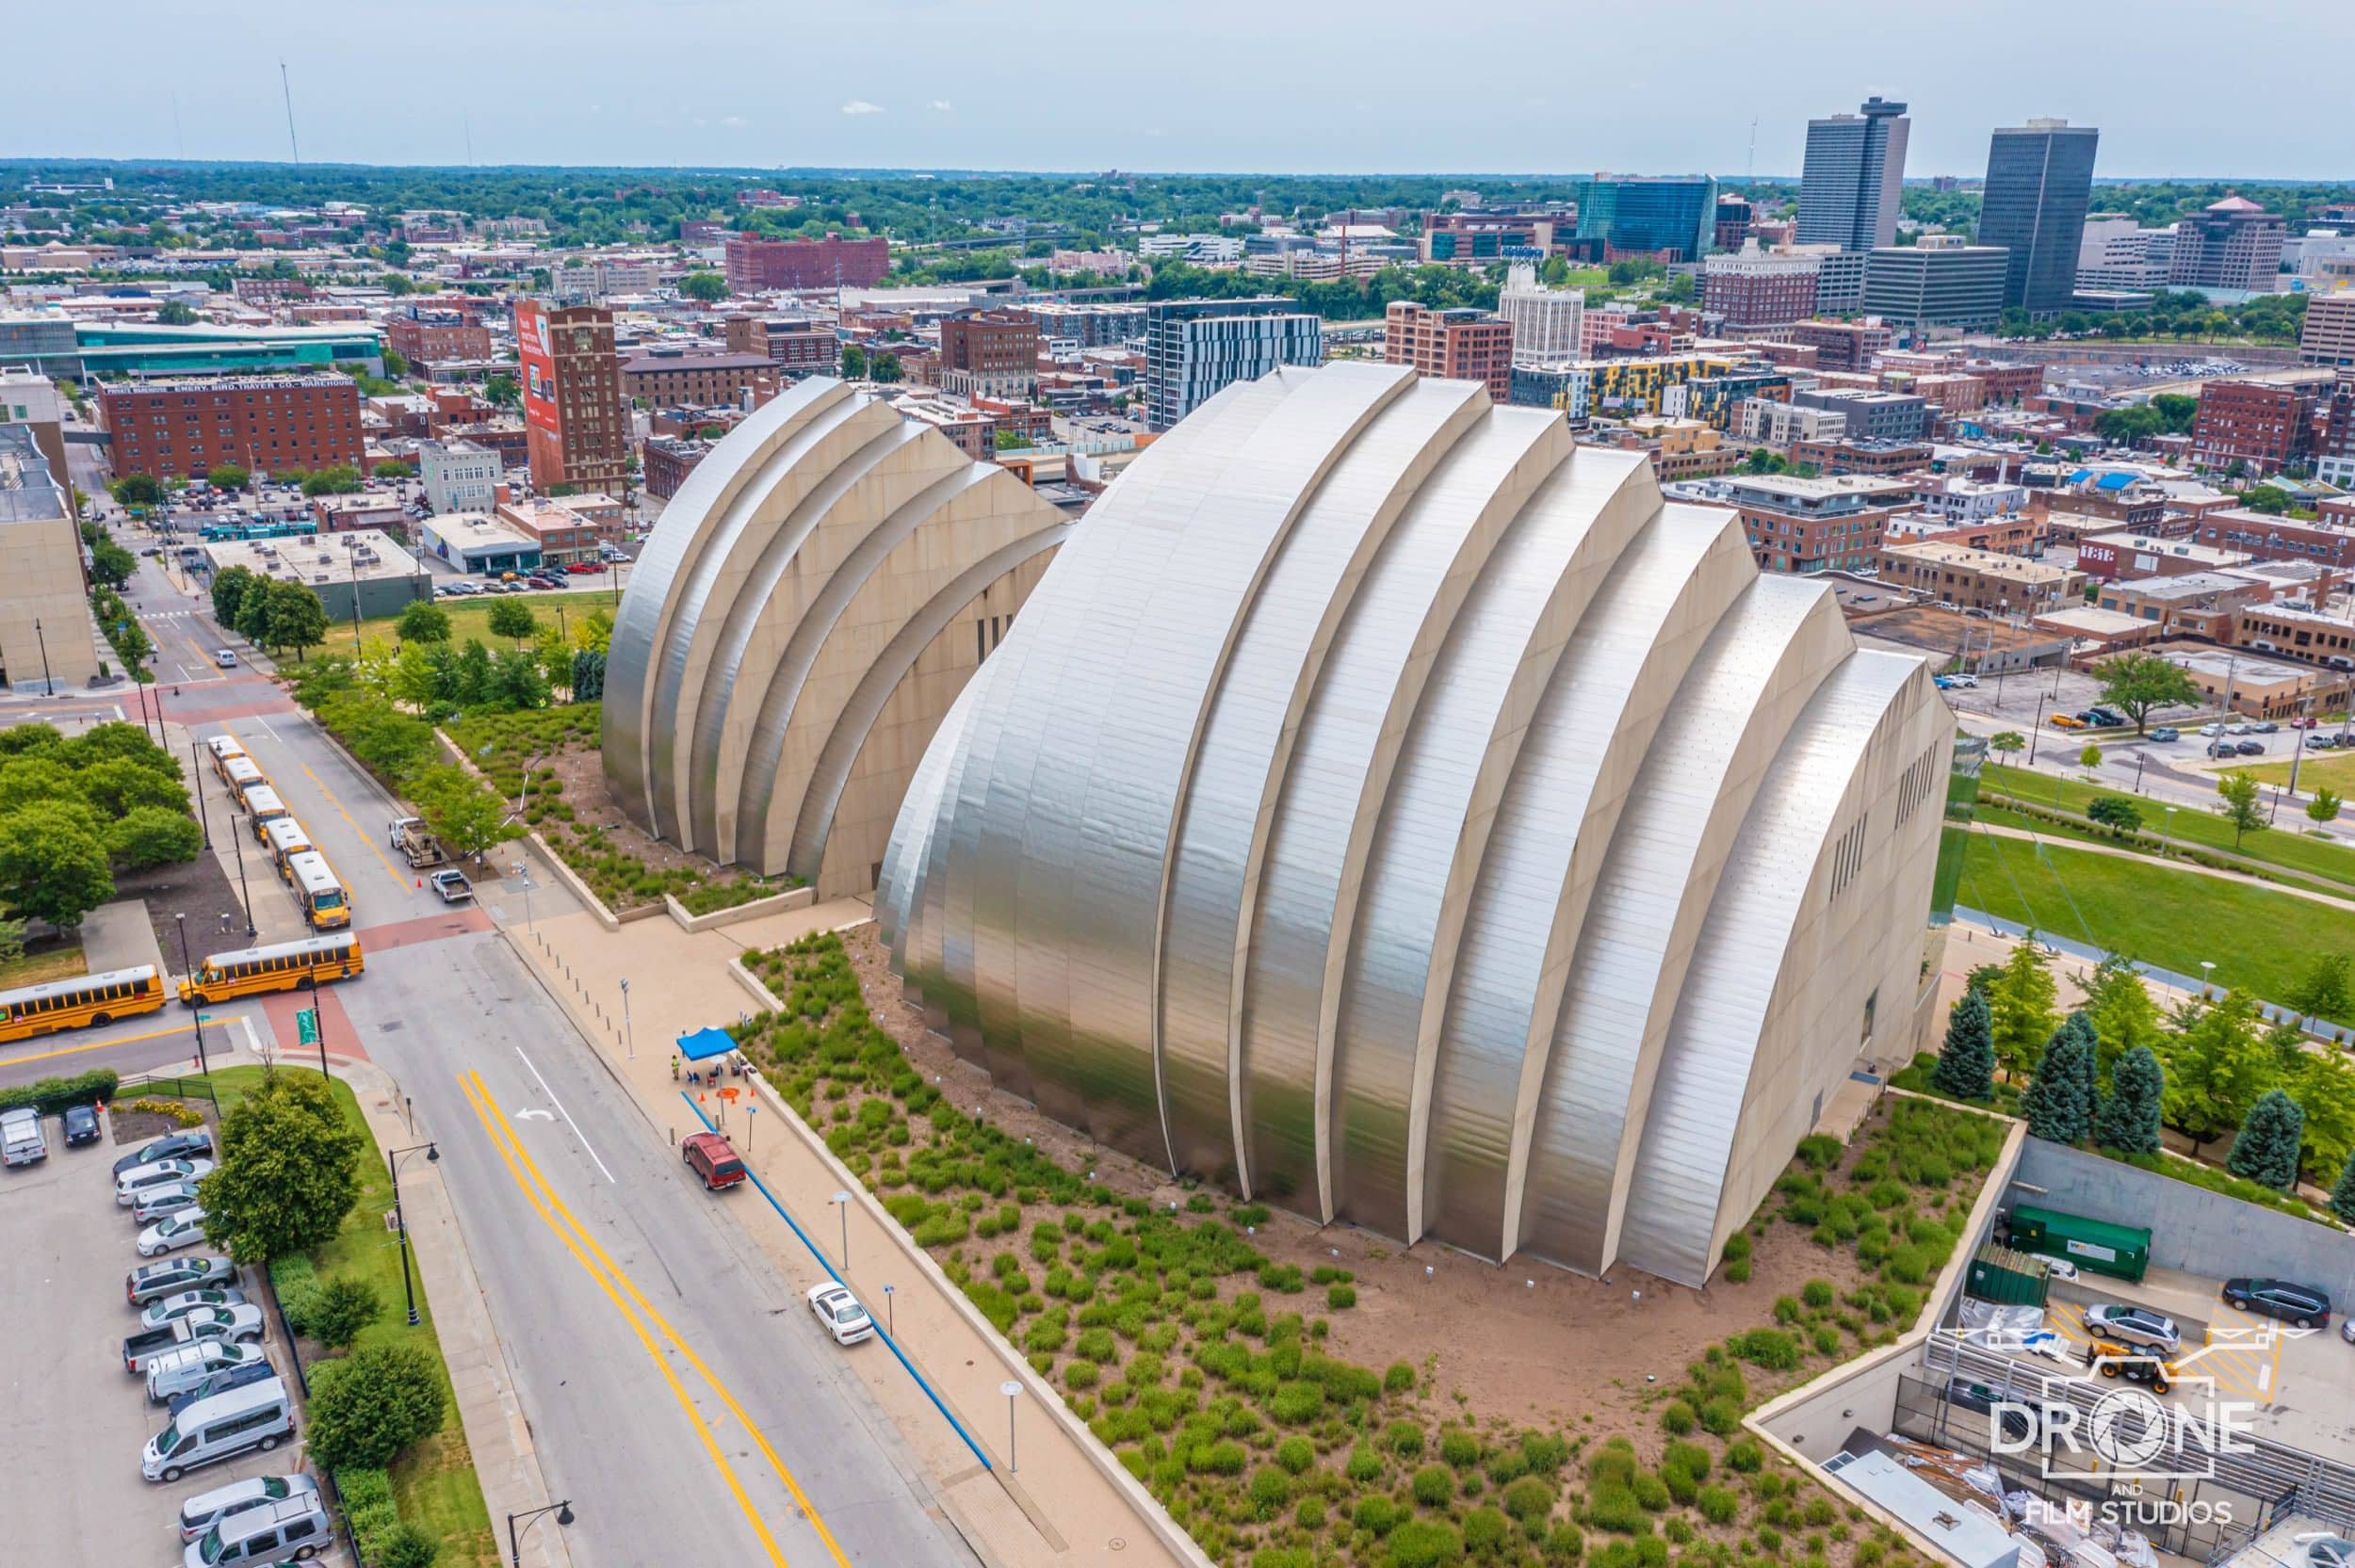 KAUFFMAN CENTER FOR THE PERFORMING ARTS CLAD IN GB-60 STAINLESS STEEL.